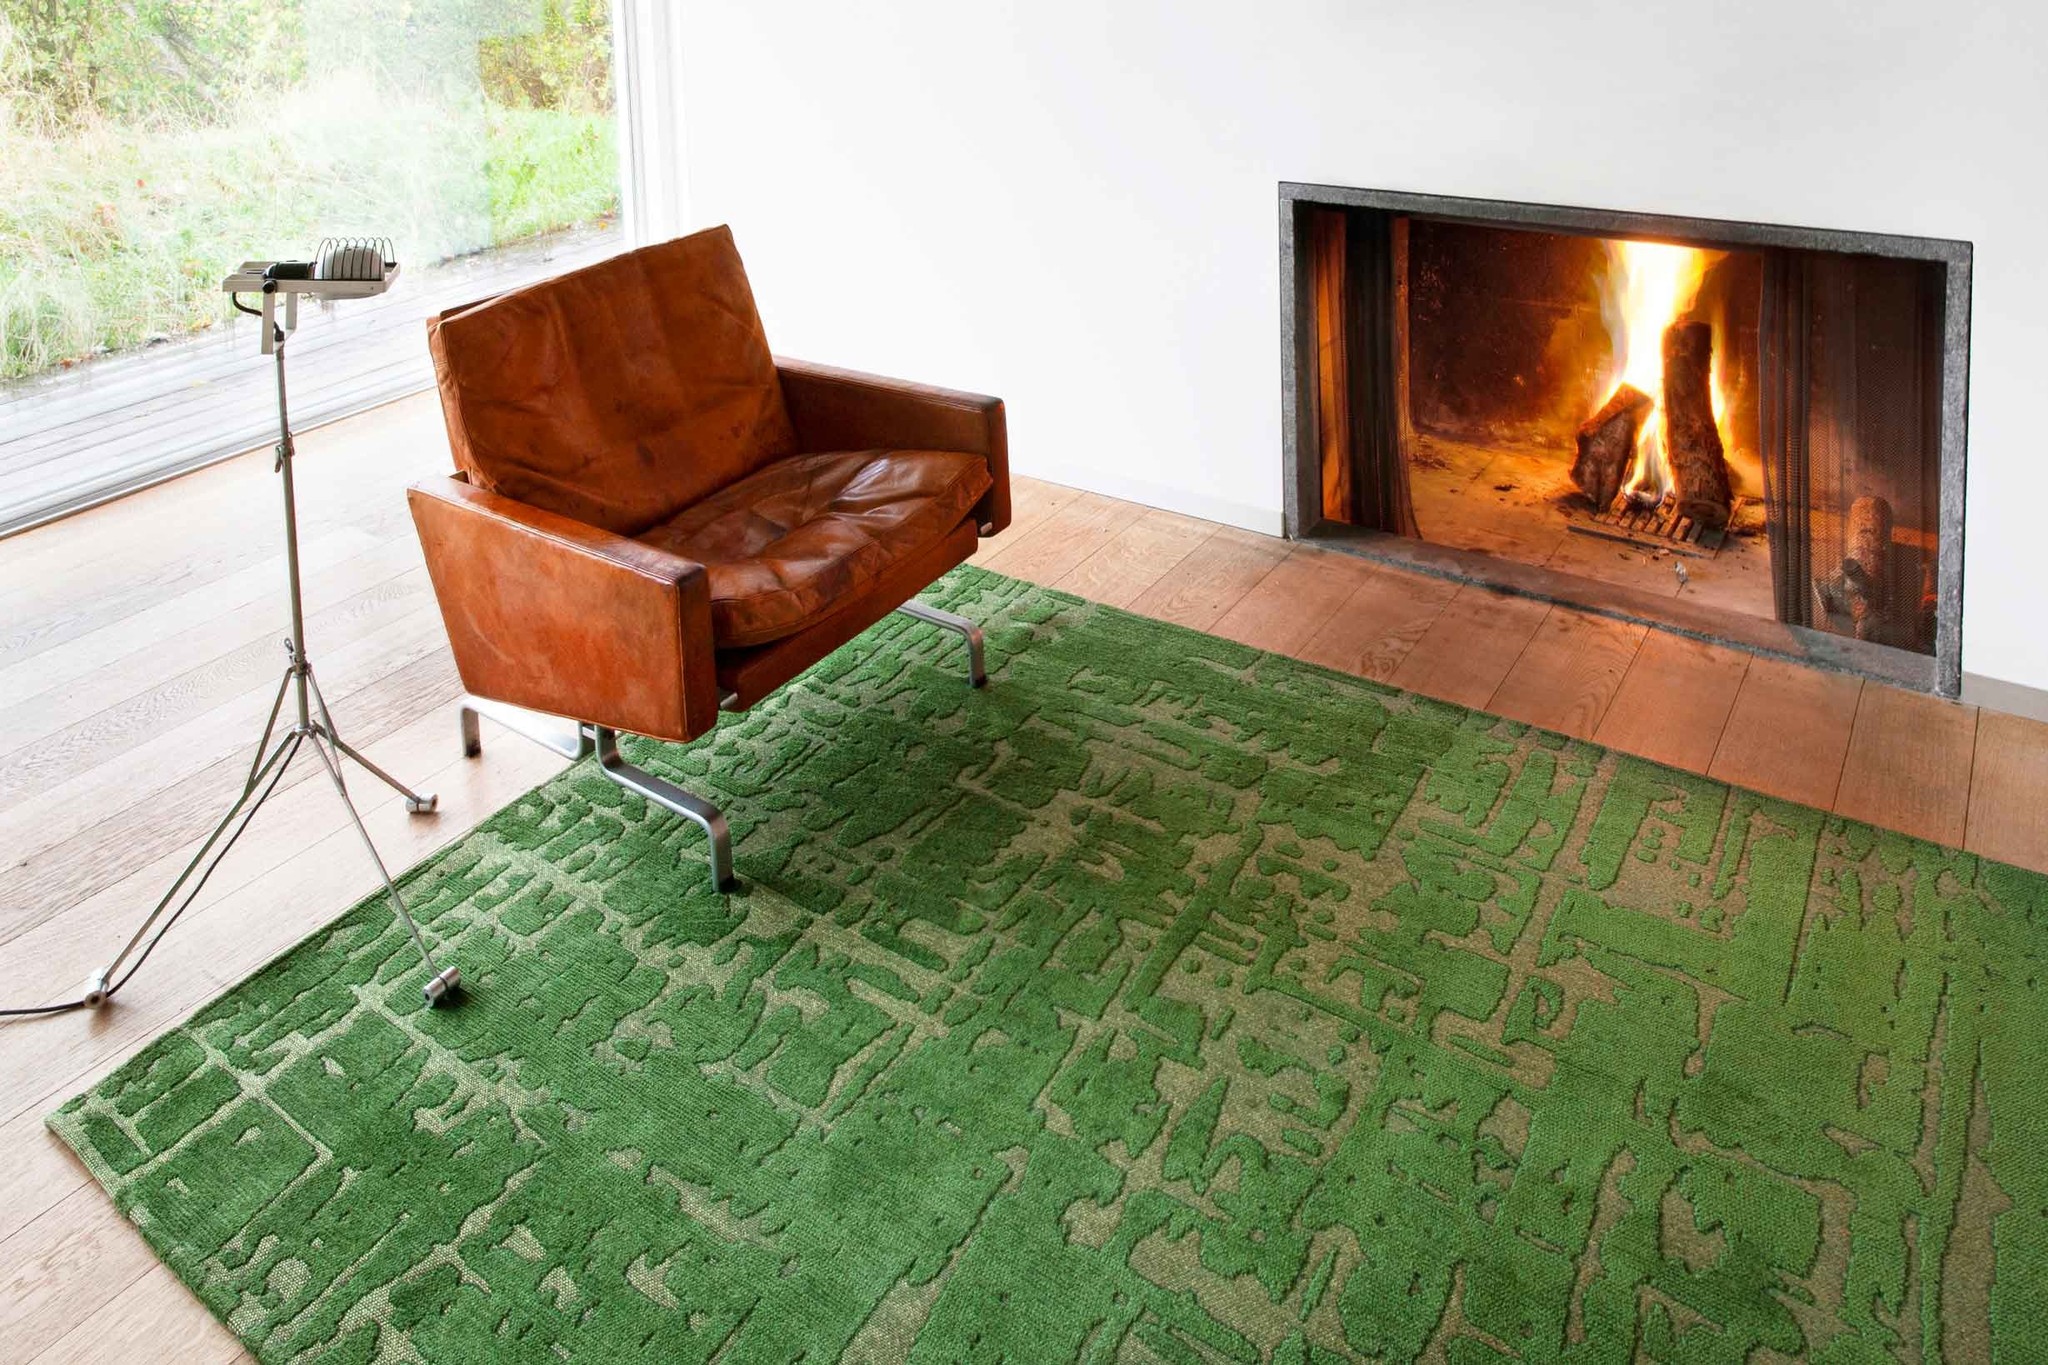 Abstract Green Belgian Rug ☞ Size: 6' 7" x 9' 2" (200 x 280 cm)